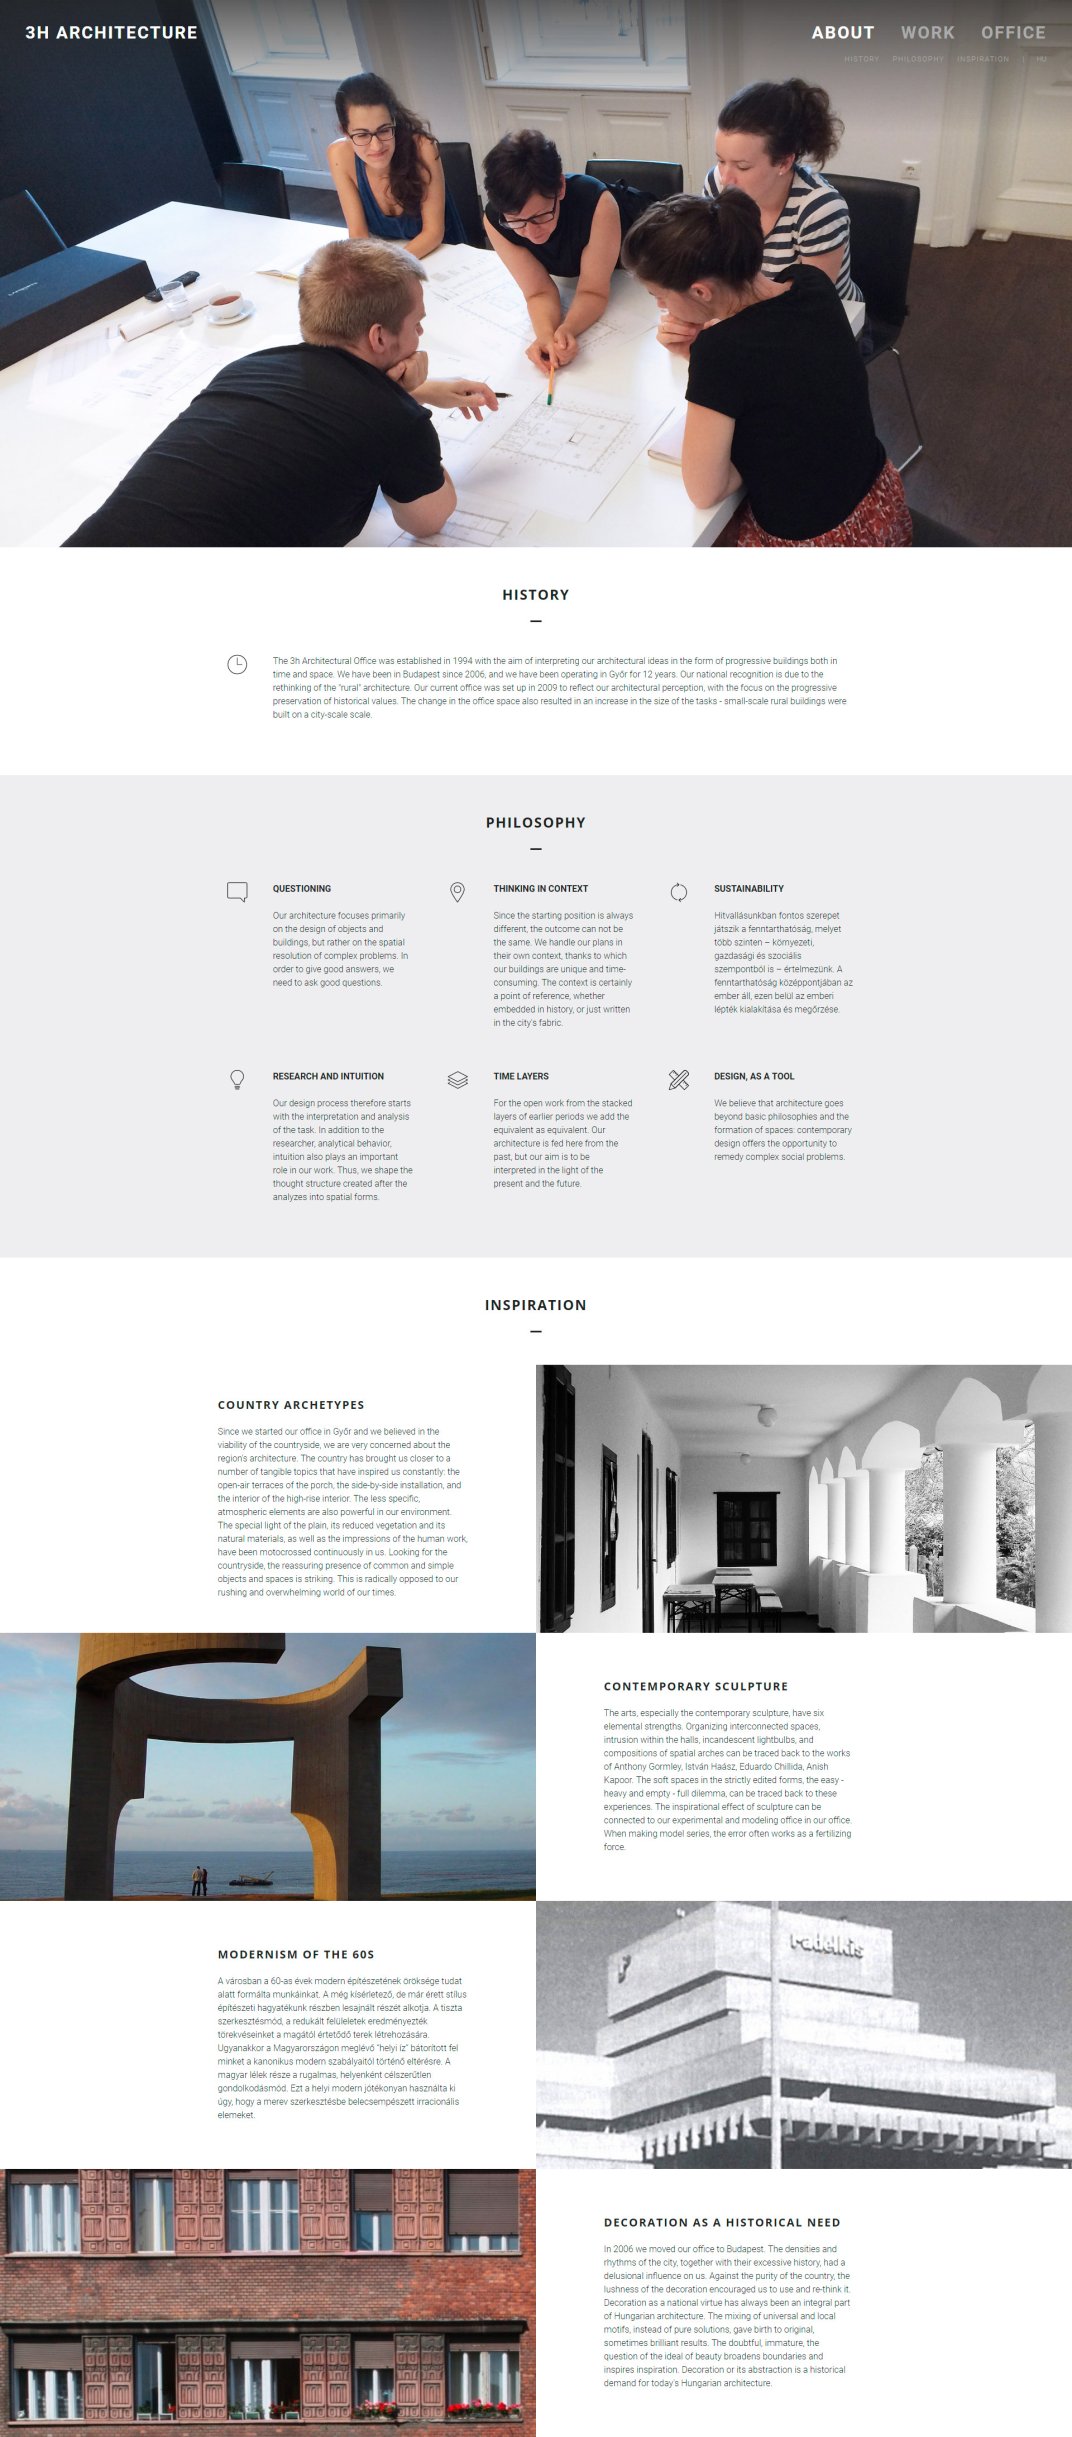 3h Architecture custom designed website development about page screen